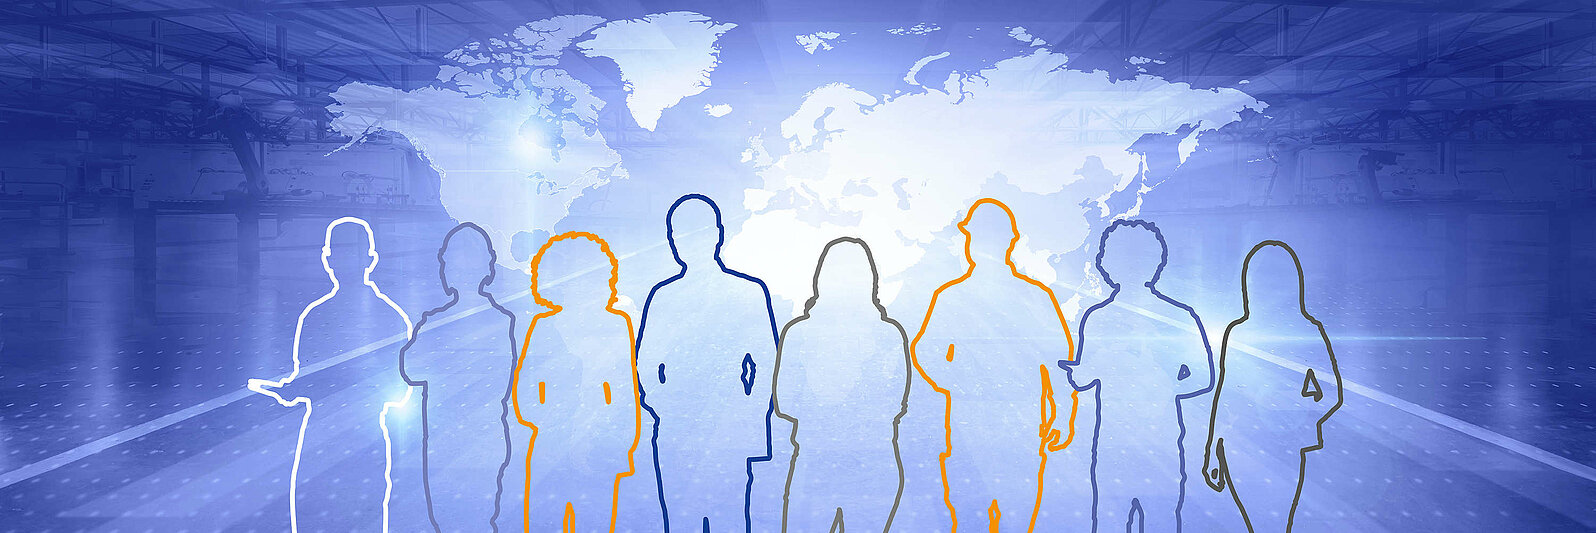 Outlines of several people in front of a world map, symbolizing diversity.